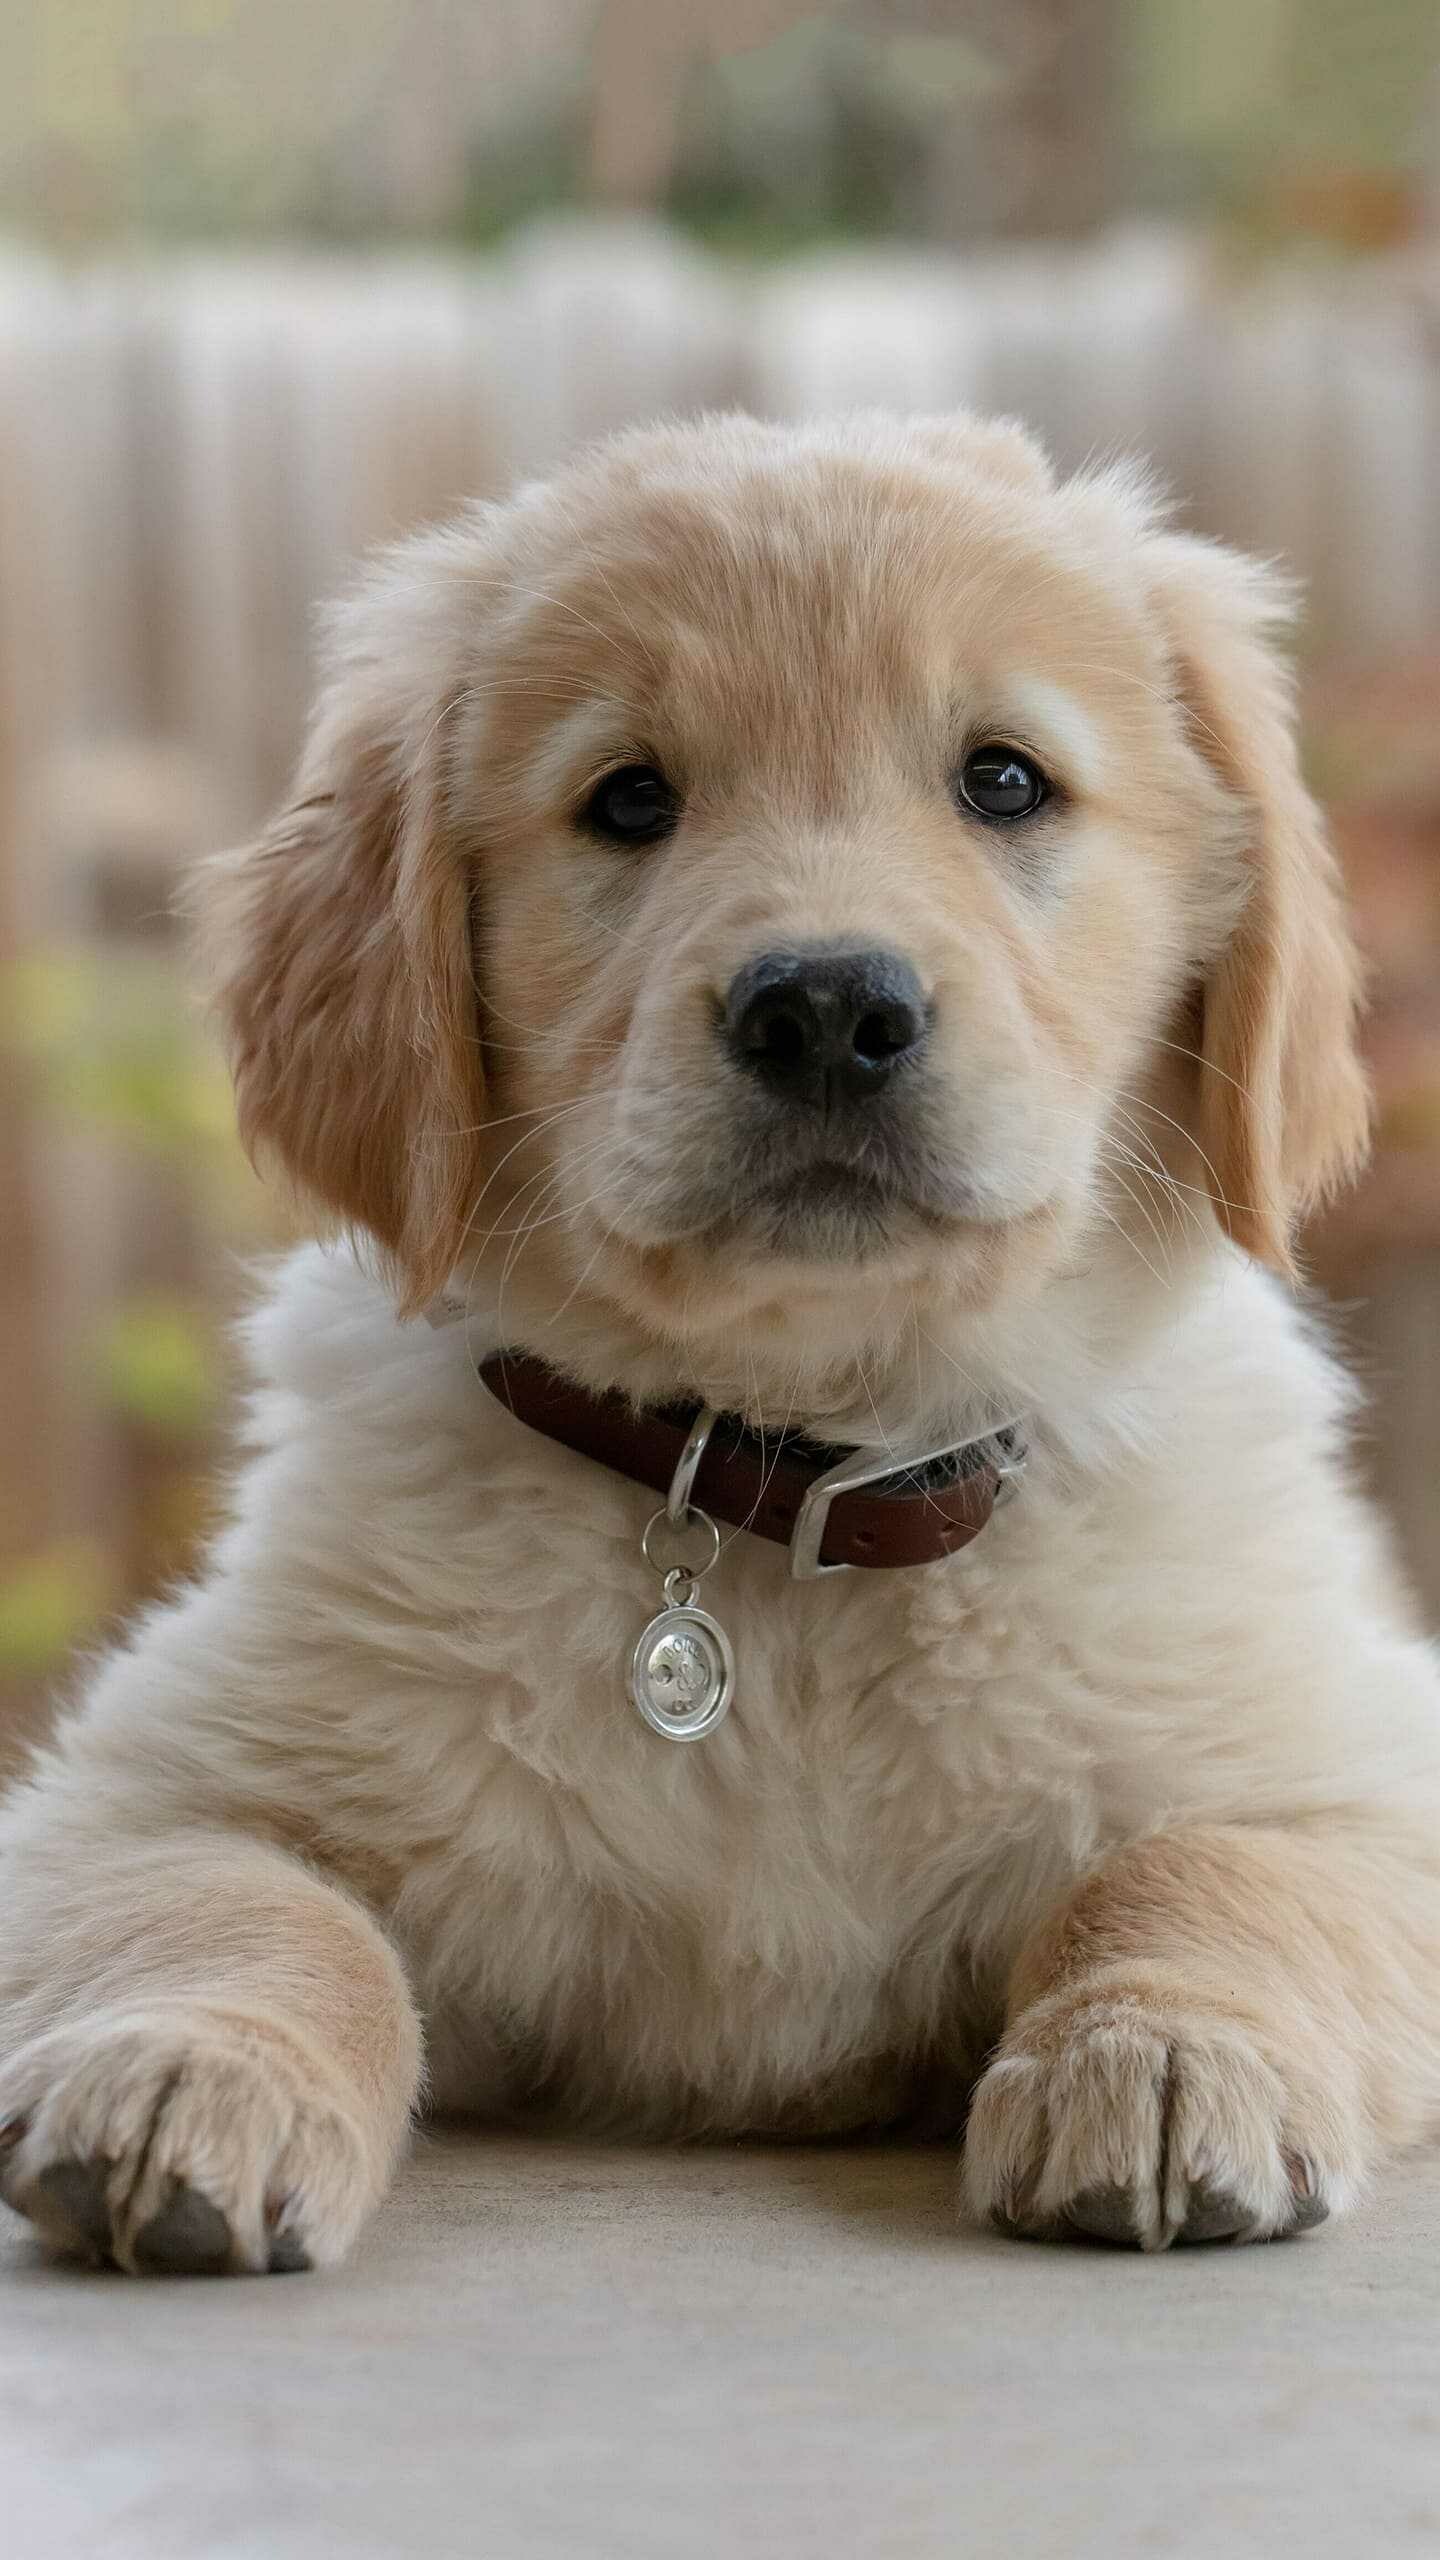 Puppy: The first animals ever to be domesticated, Used as pets. 1440x2560 HD Wallpaper.